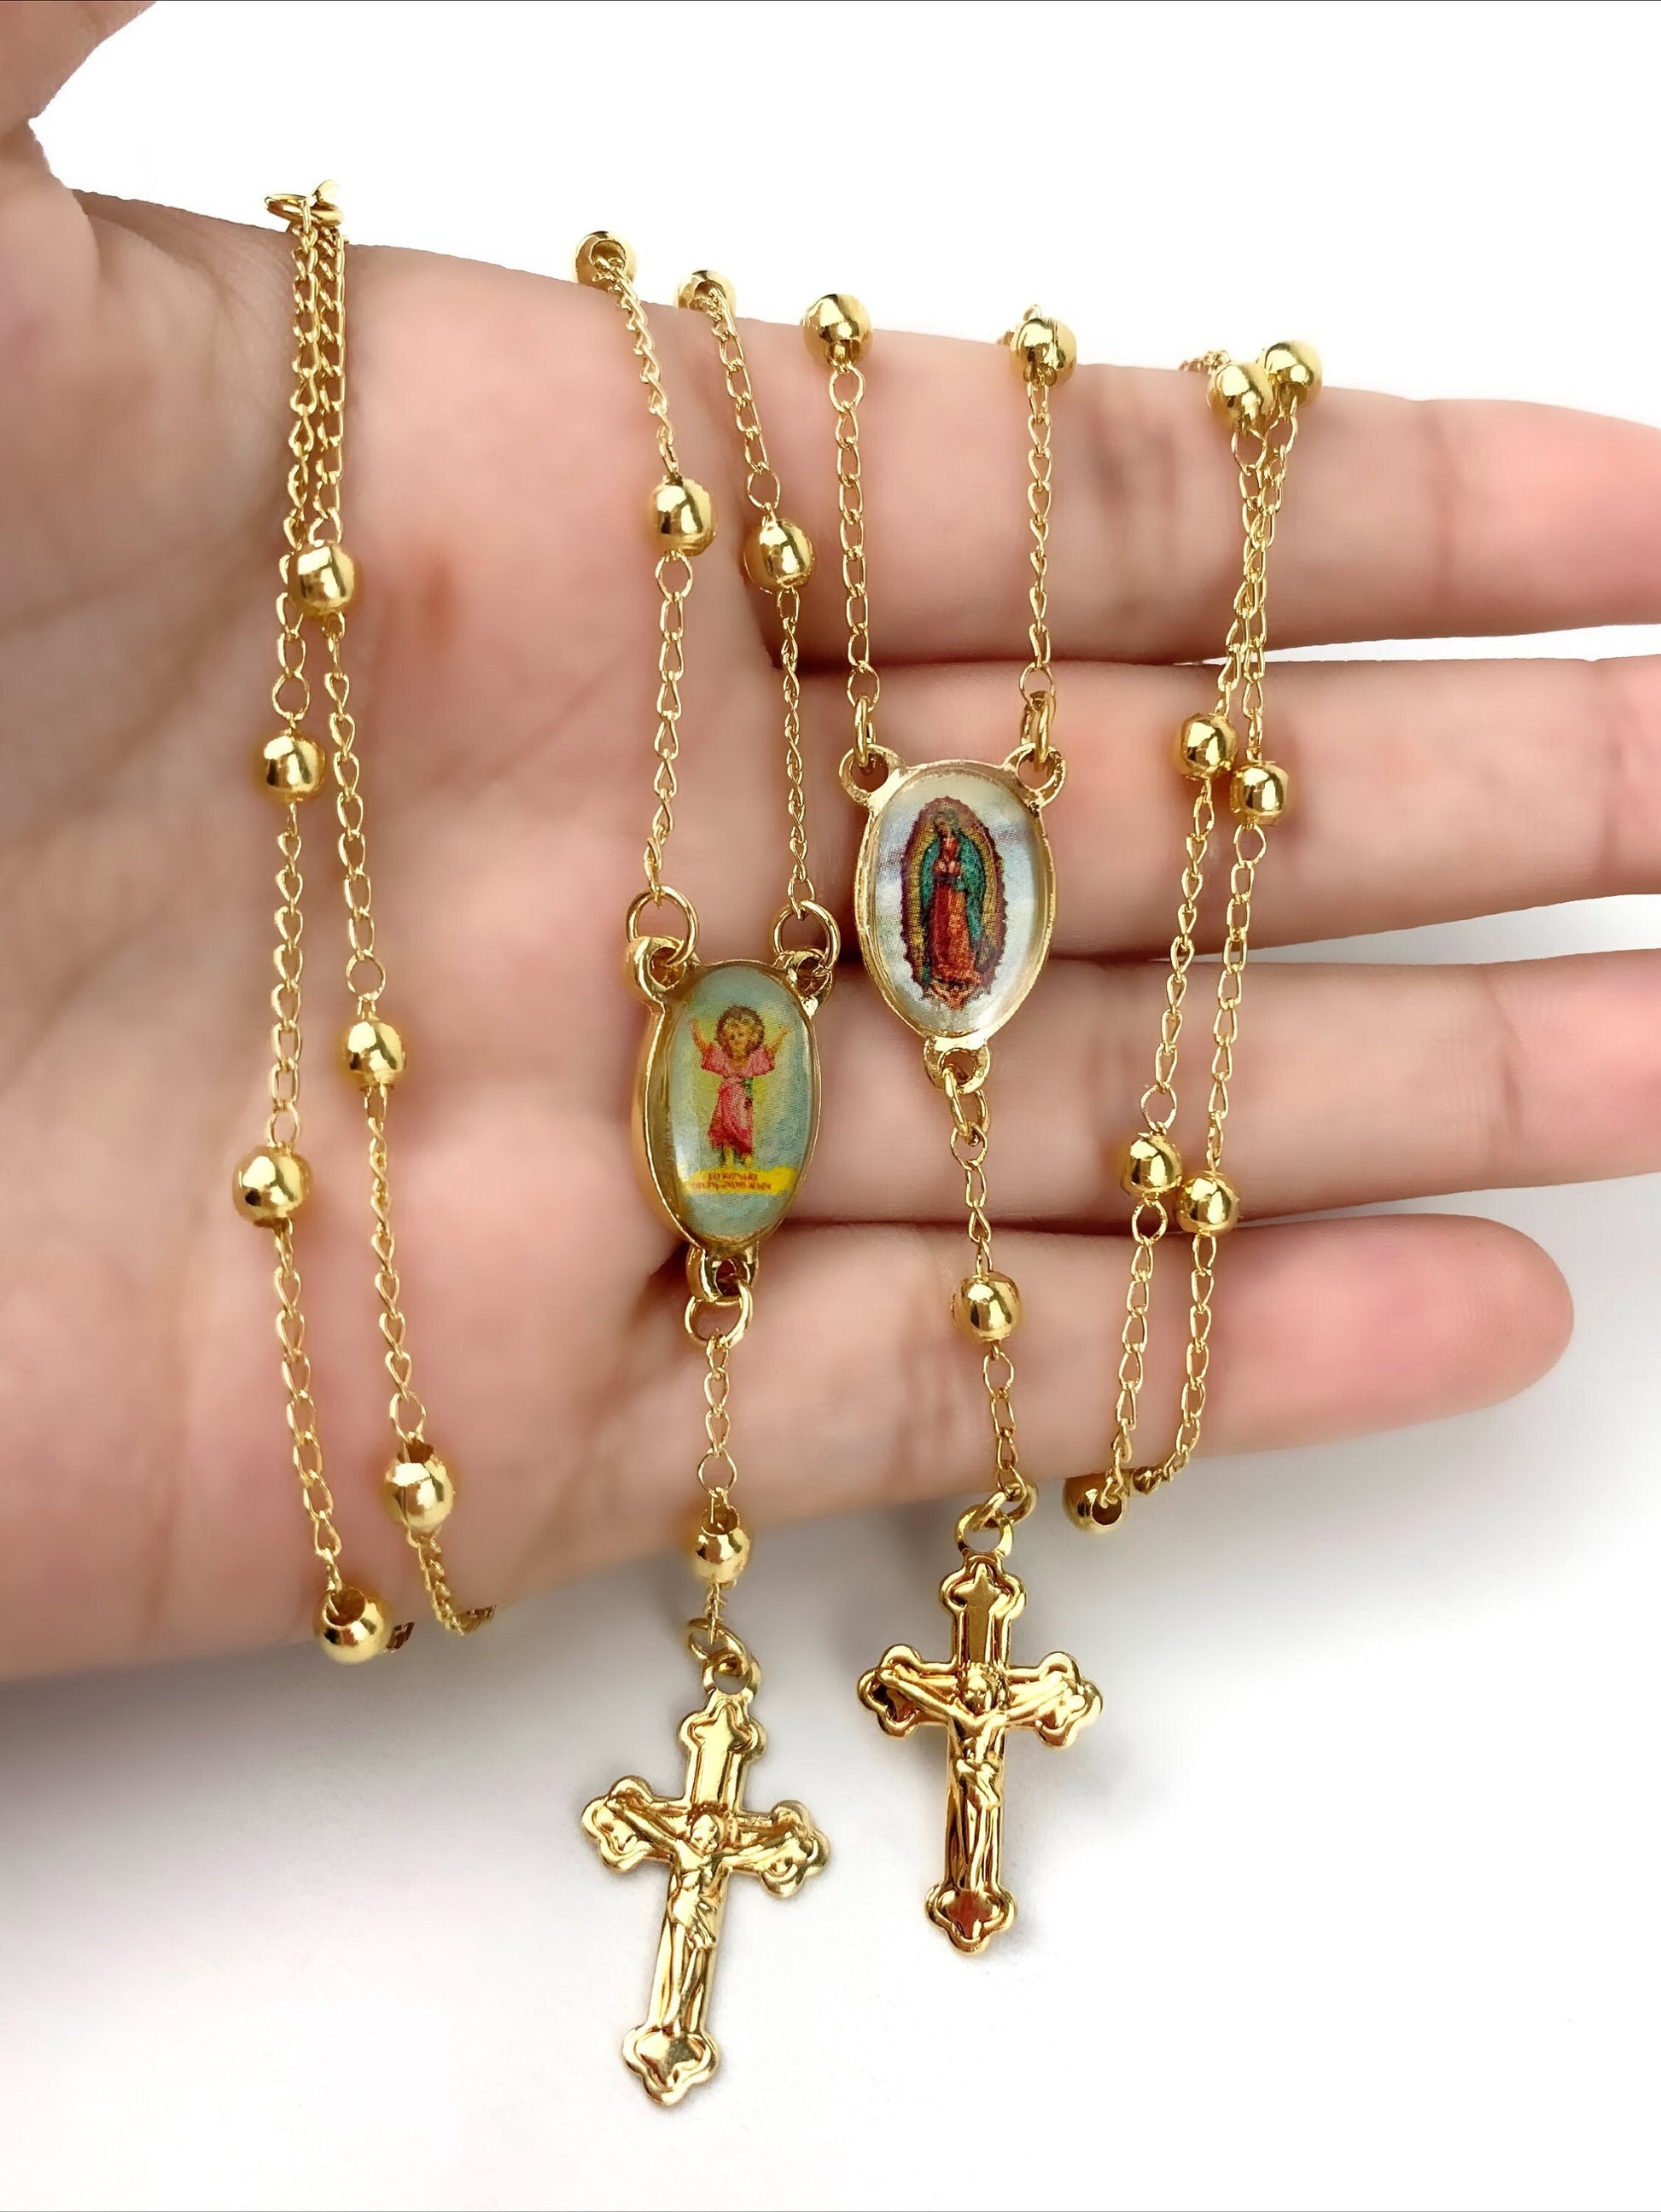 18k Gold Filled Chain & Gold Beads Divine Child, Divino Nino or Our Lady of Guadalupe Rosary Necklace, Wholesale Jewelry Making Supplies